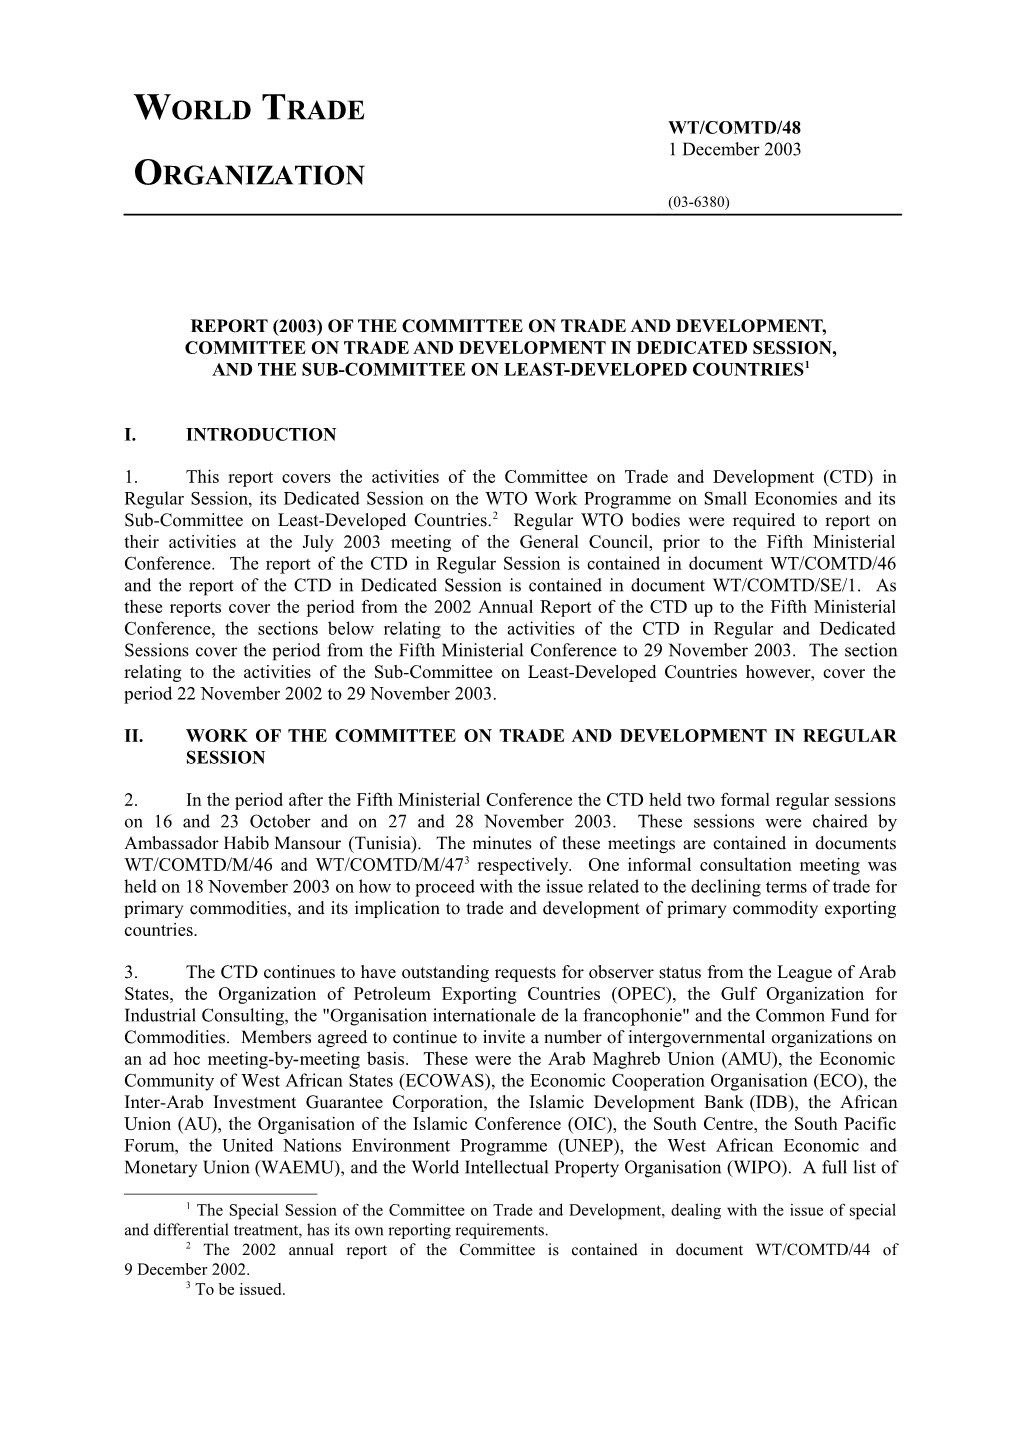 Report (2003) of the Committee on Trade and Development